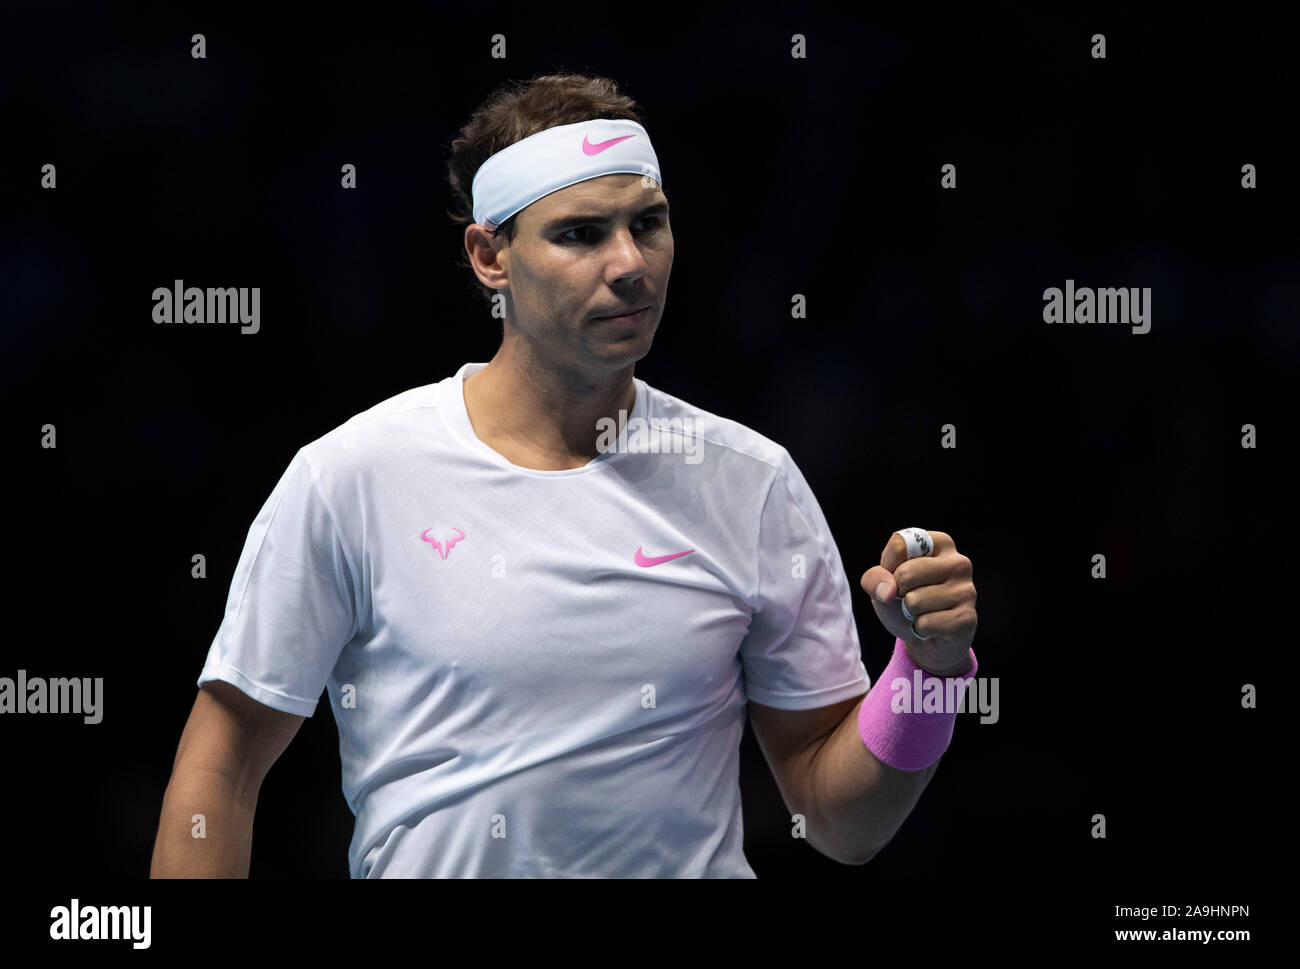 London, UK. 15th Nov, 2019. Rafael Nadal of Spain celebrates during the singles group match against Stefanos Tsitsipas of Greece at the ATP World Tour Finals 2019 in London, Britain on Nov. 15, 2019. Credit: Han Yan/Xinhua/Alamy Live News Stock Photo